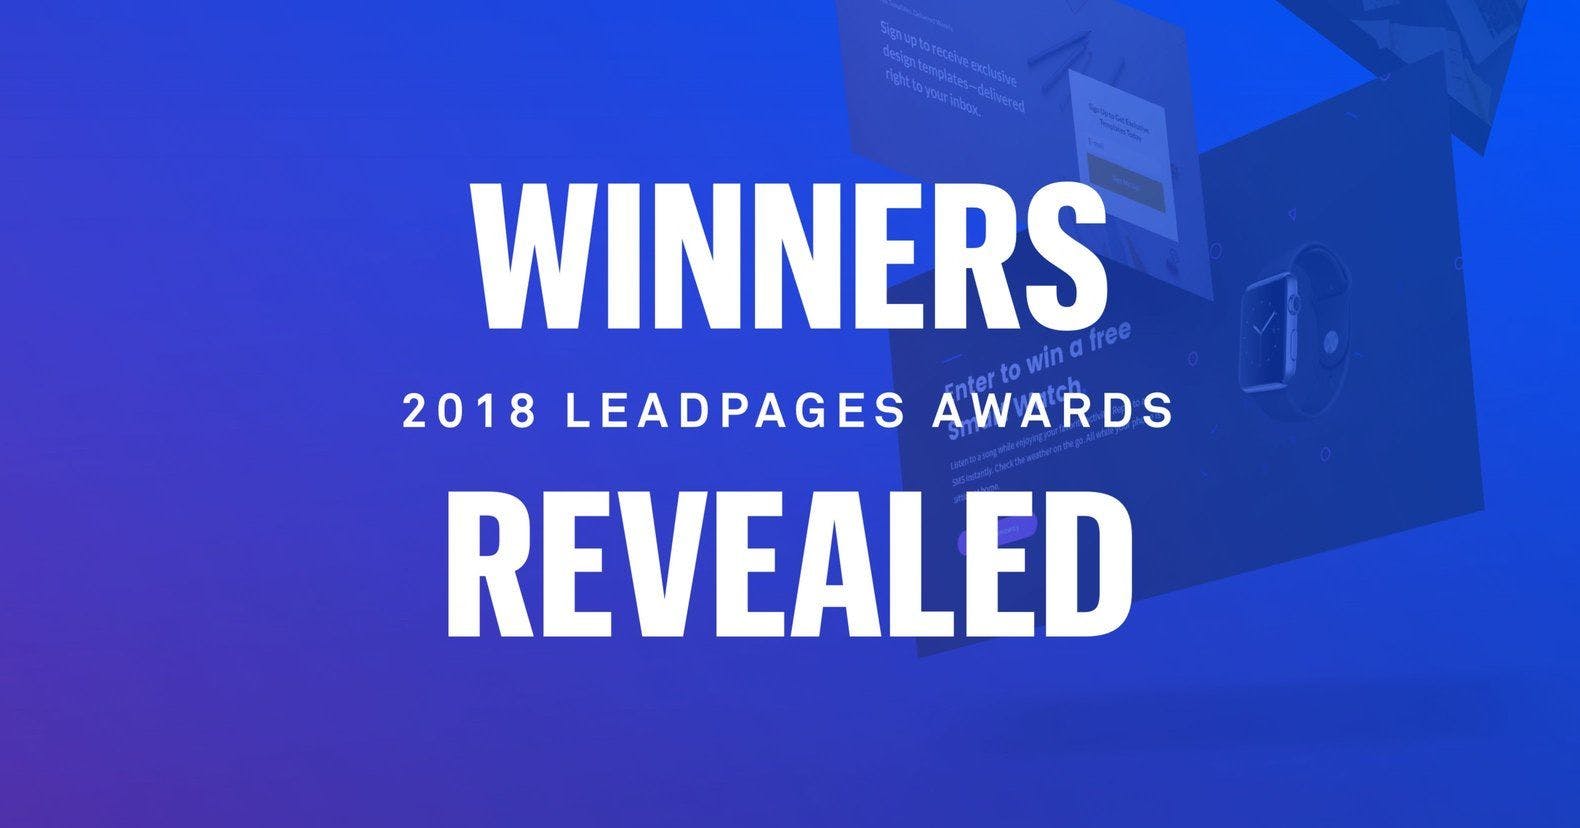 Winners Revealed: 2018 Leadpages Awards